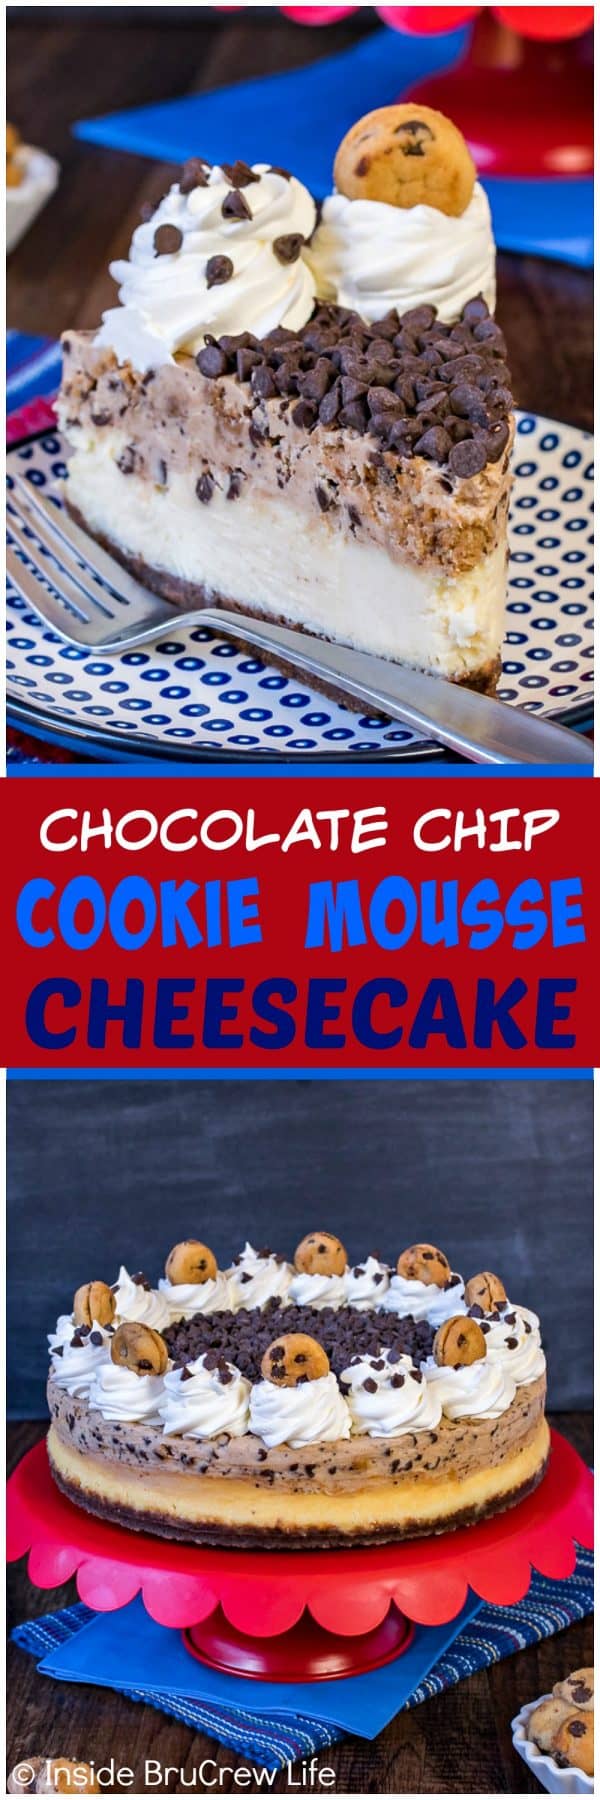 Chocolate Chip Cookie Mousse Cheesecake - layers of creamy cheesecake, cookie mousse, and chocolate chips makes a delicious dessert. Great recipe to share after any meal!